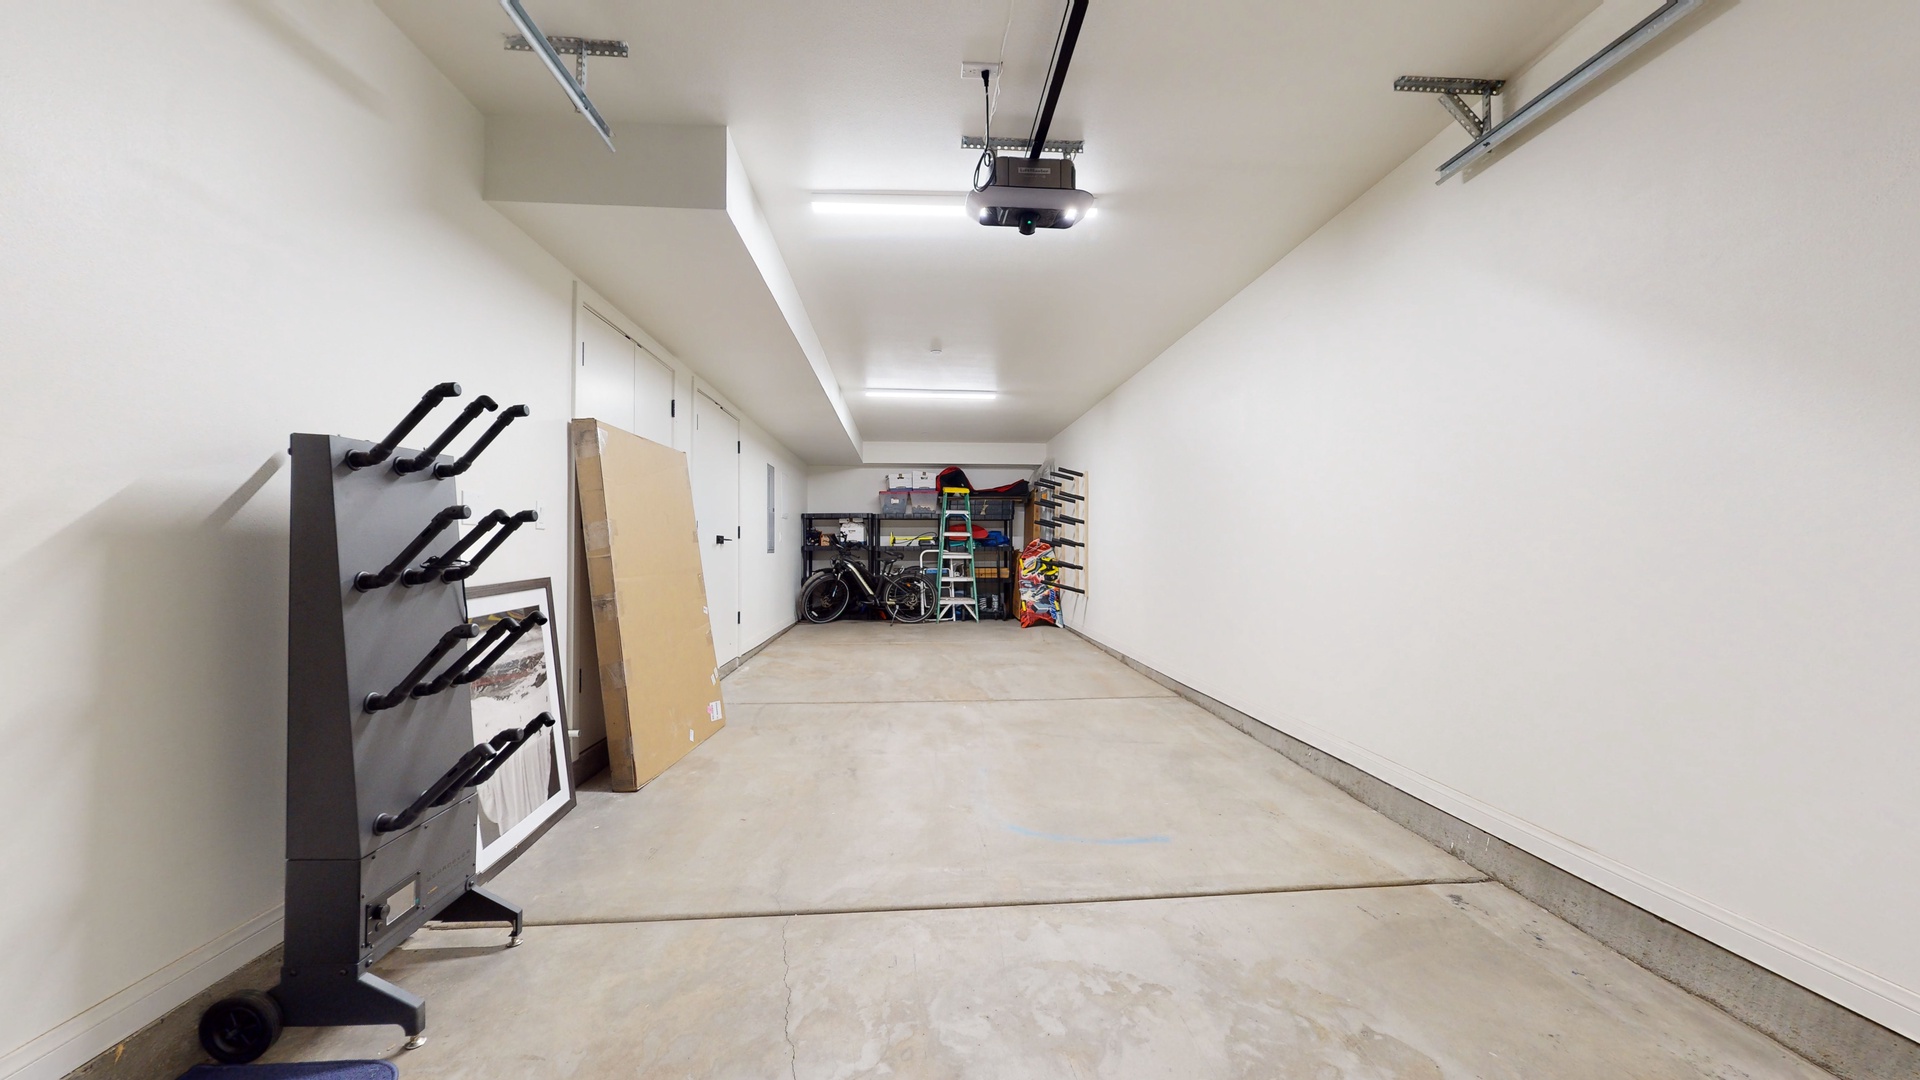 The garage offers space for 2 vehicles & fabulous amenities, including a warmer for cold weather gear